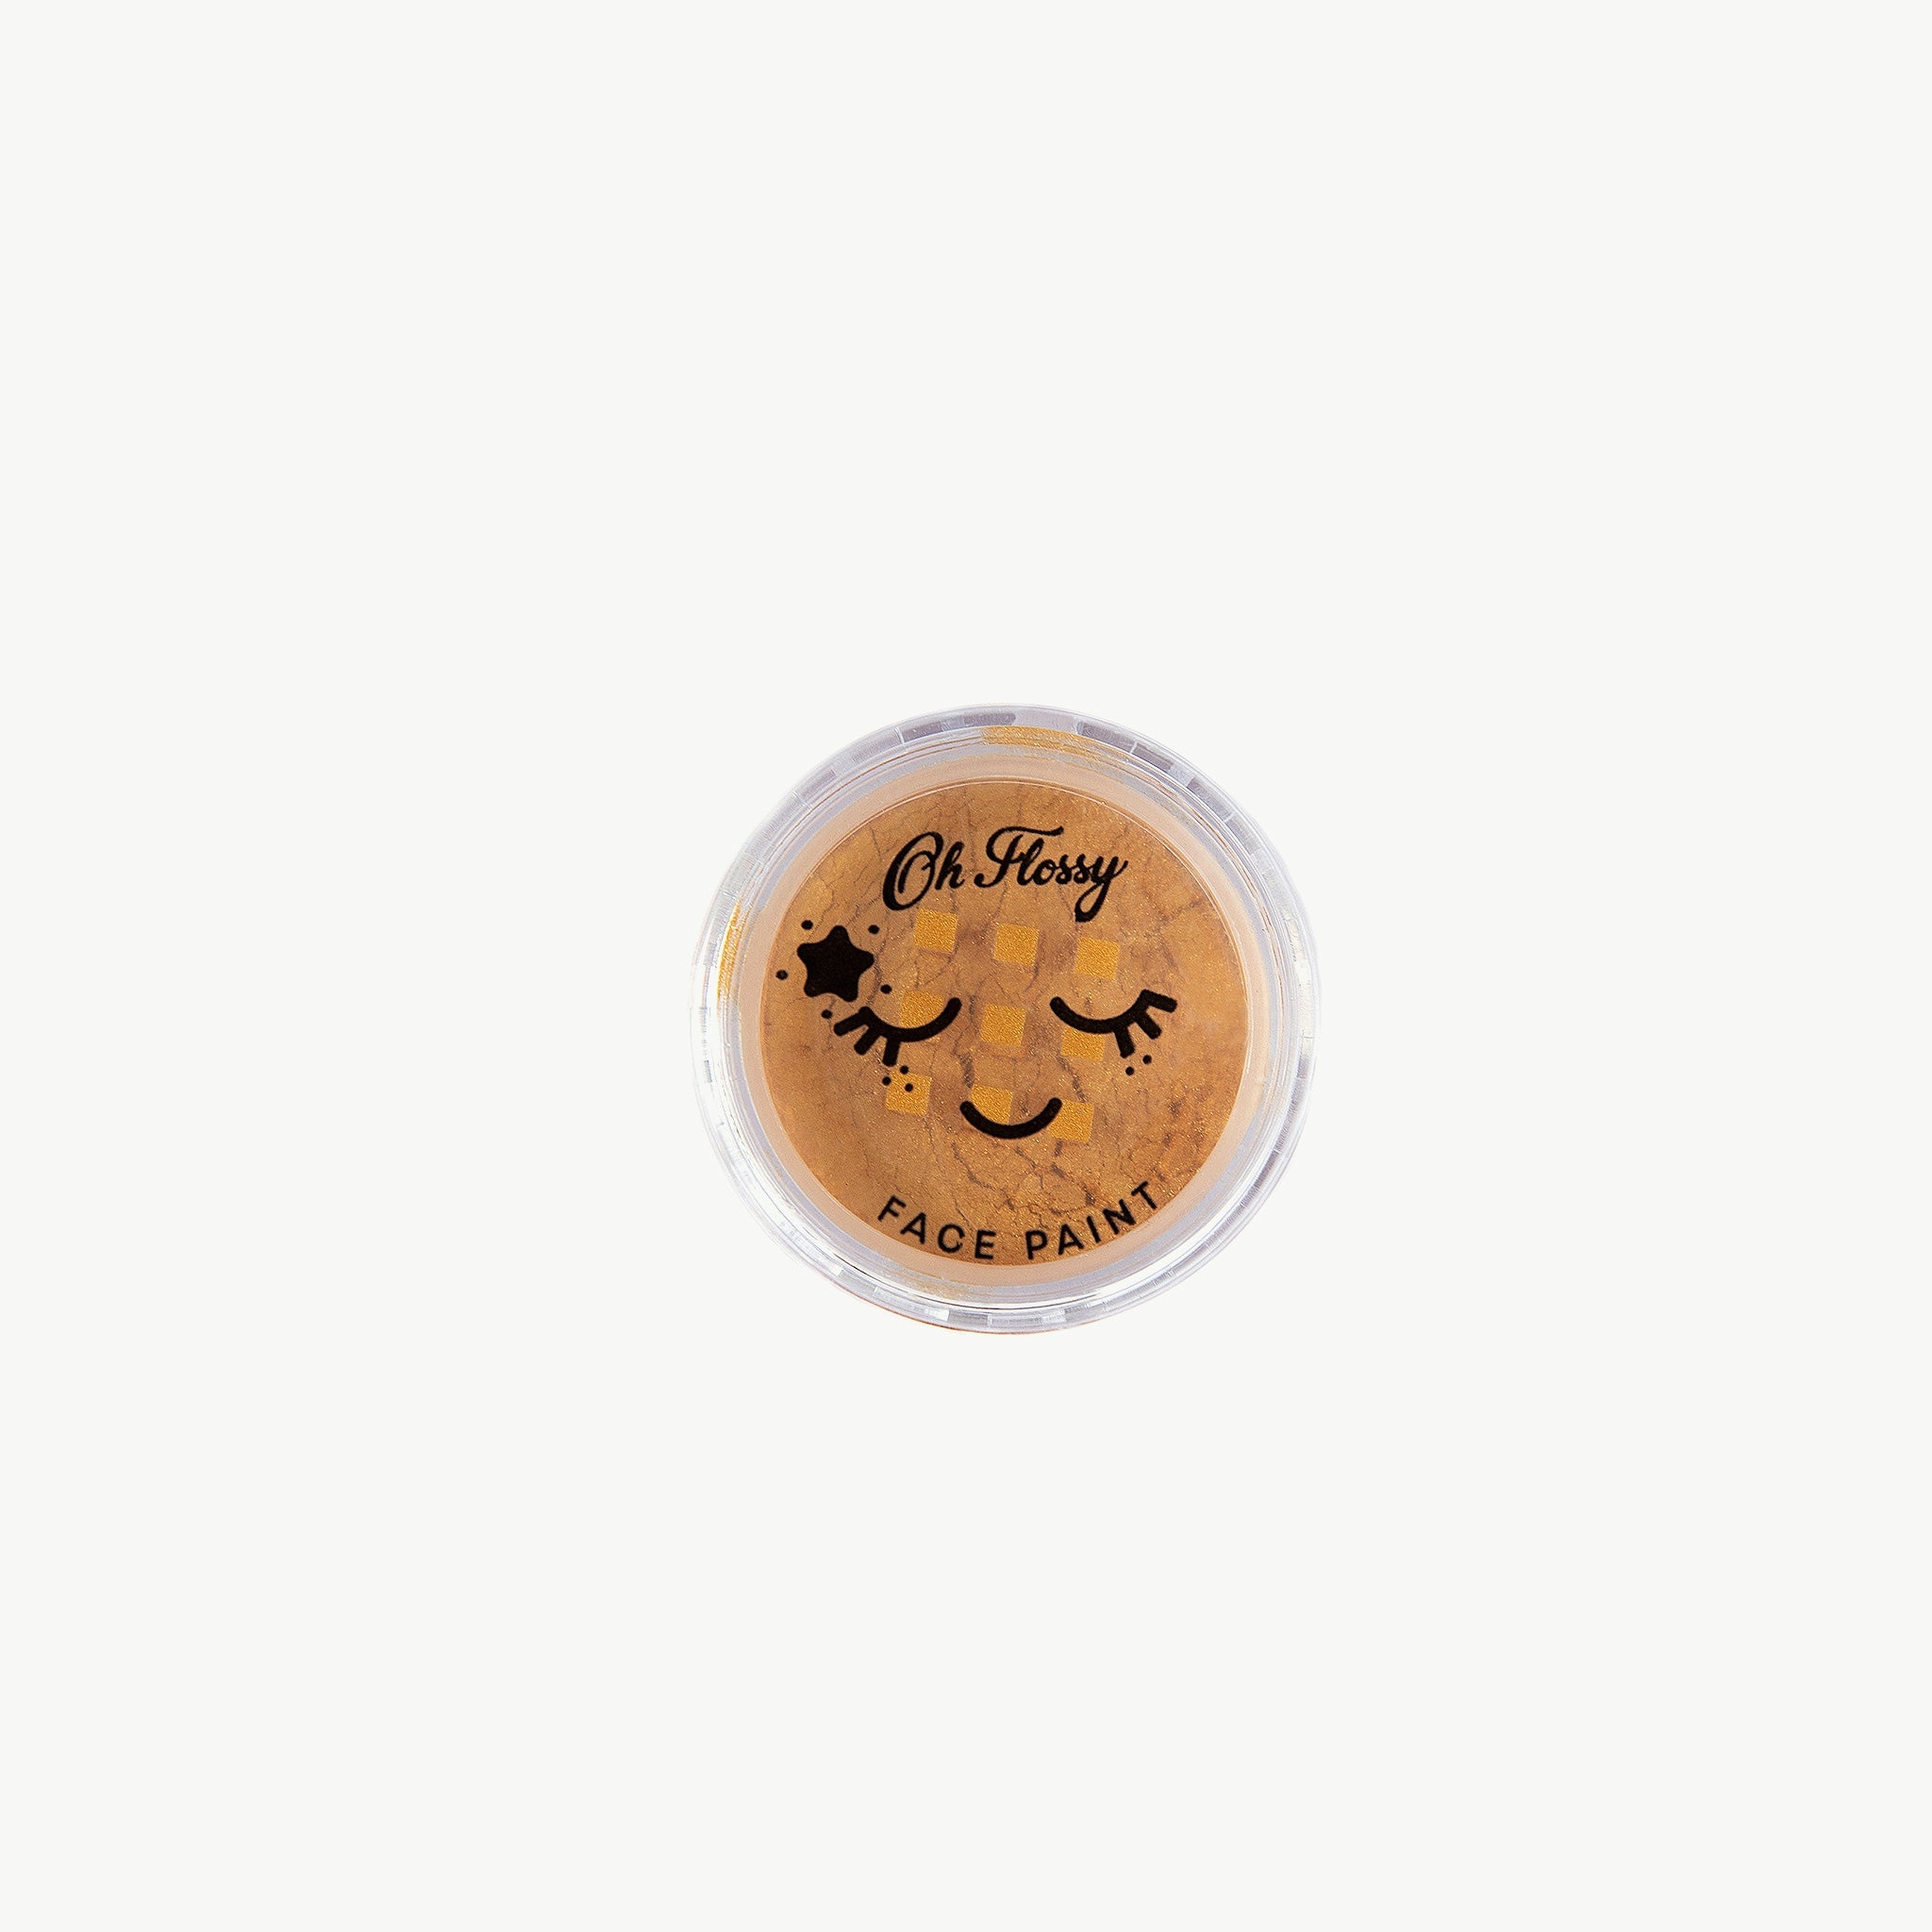 Oh-Flossy-Kids-Natural-Makeup-Face-Paint-Gold